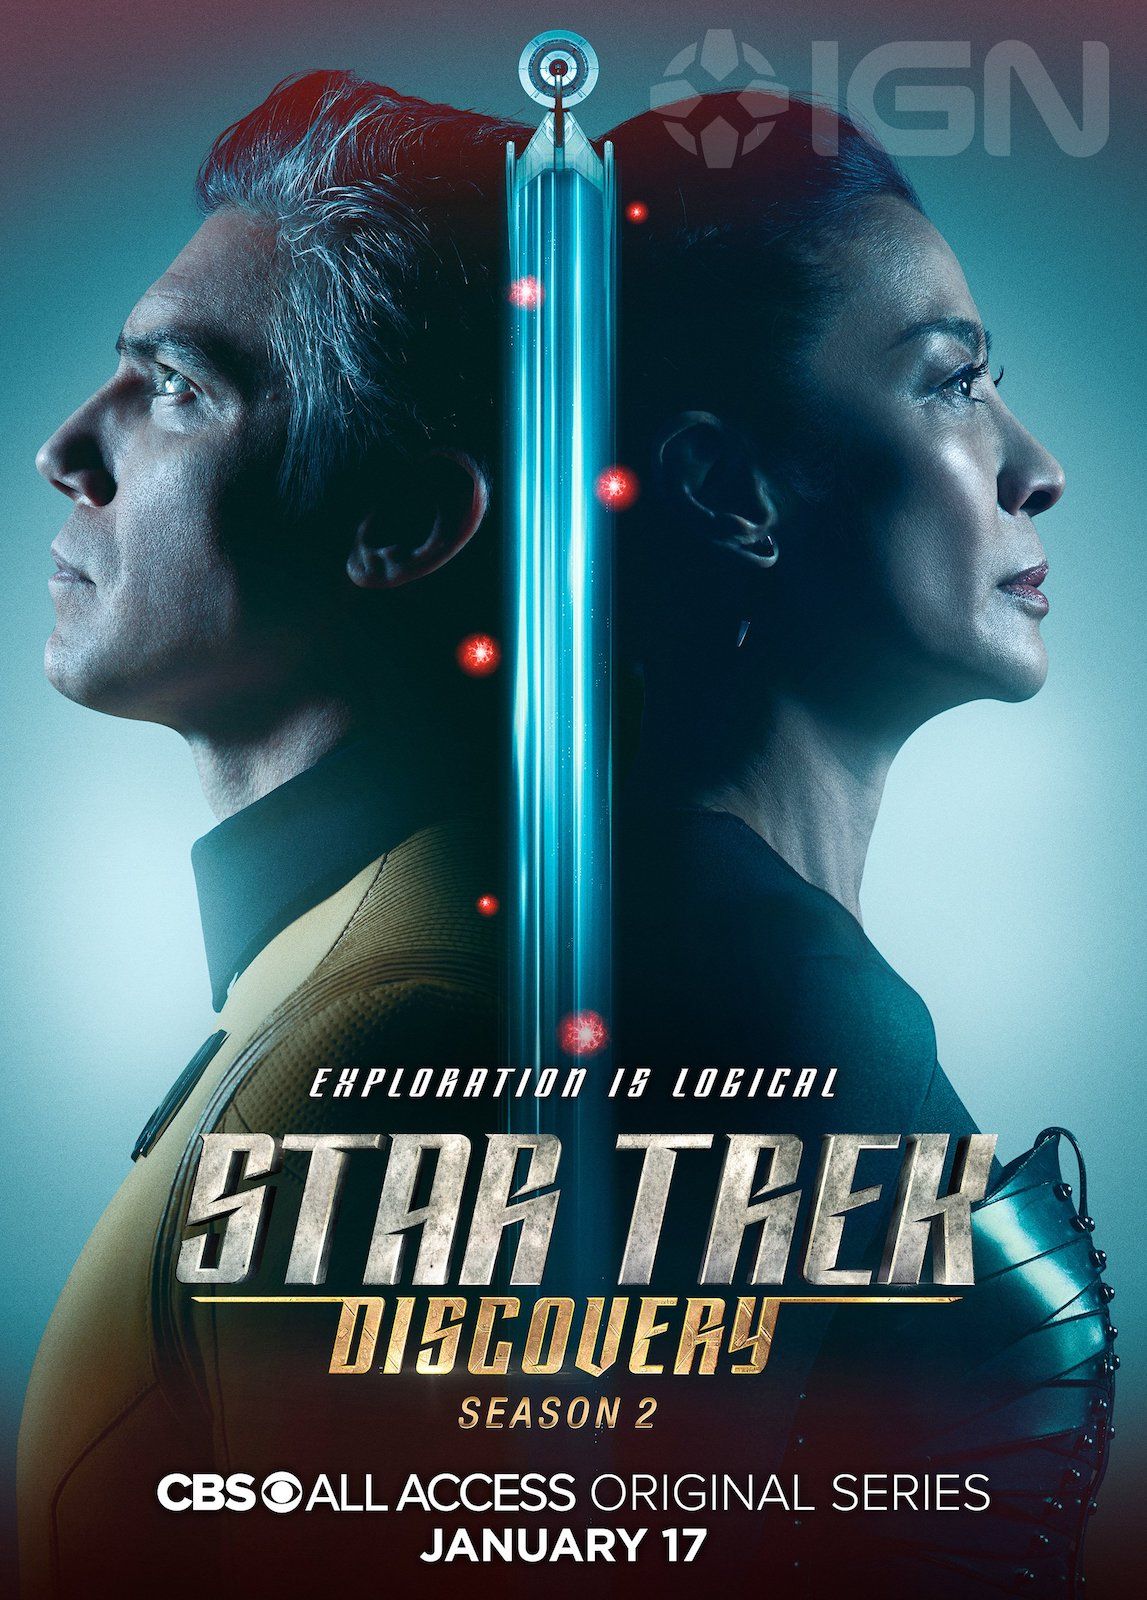 New 'Star Trek: Discovery' Season Two Posters and Cast Image, First Episode Gets A Title